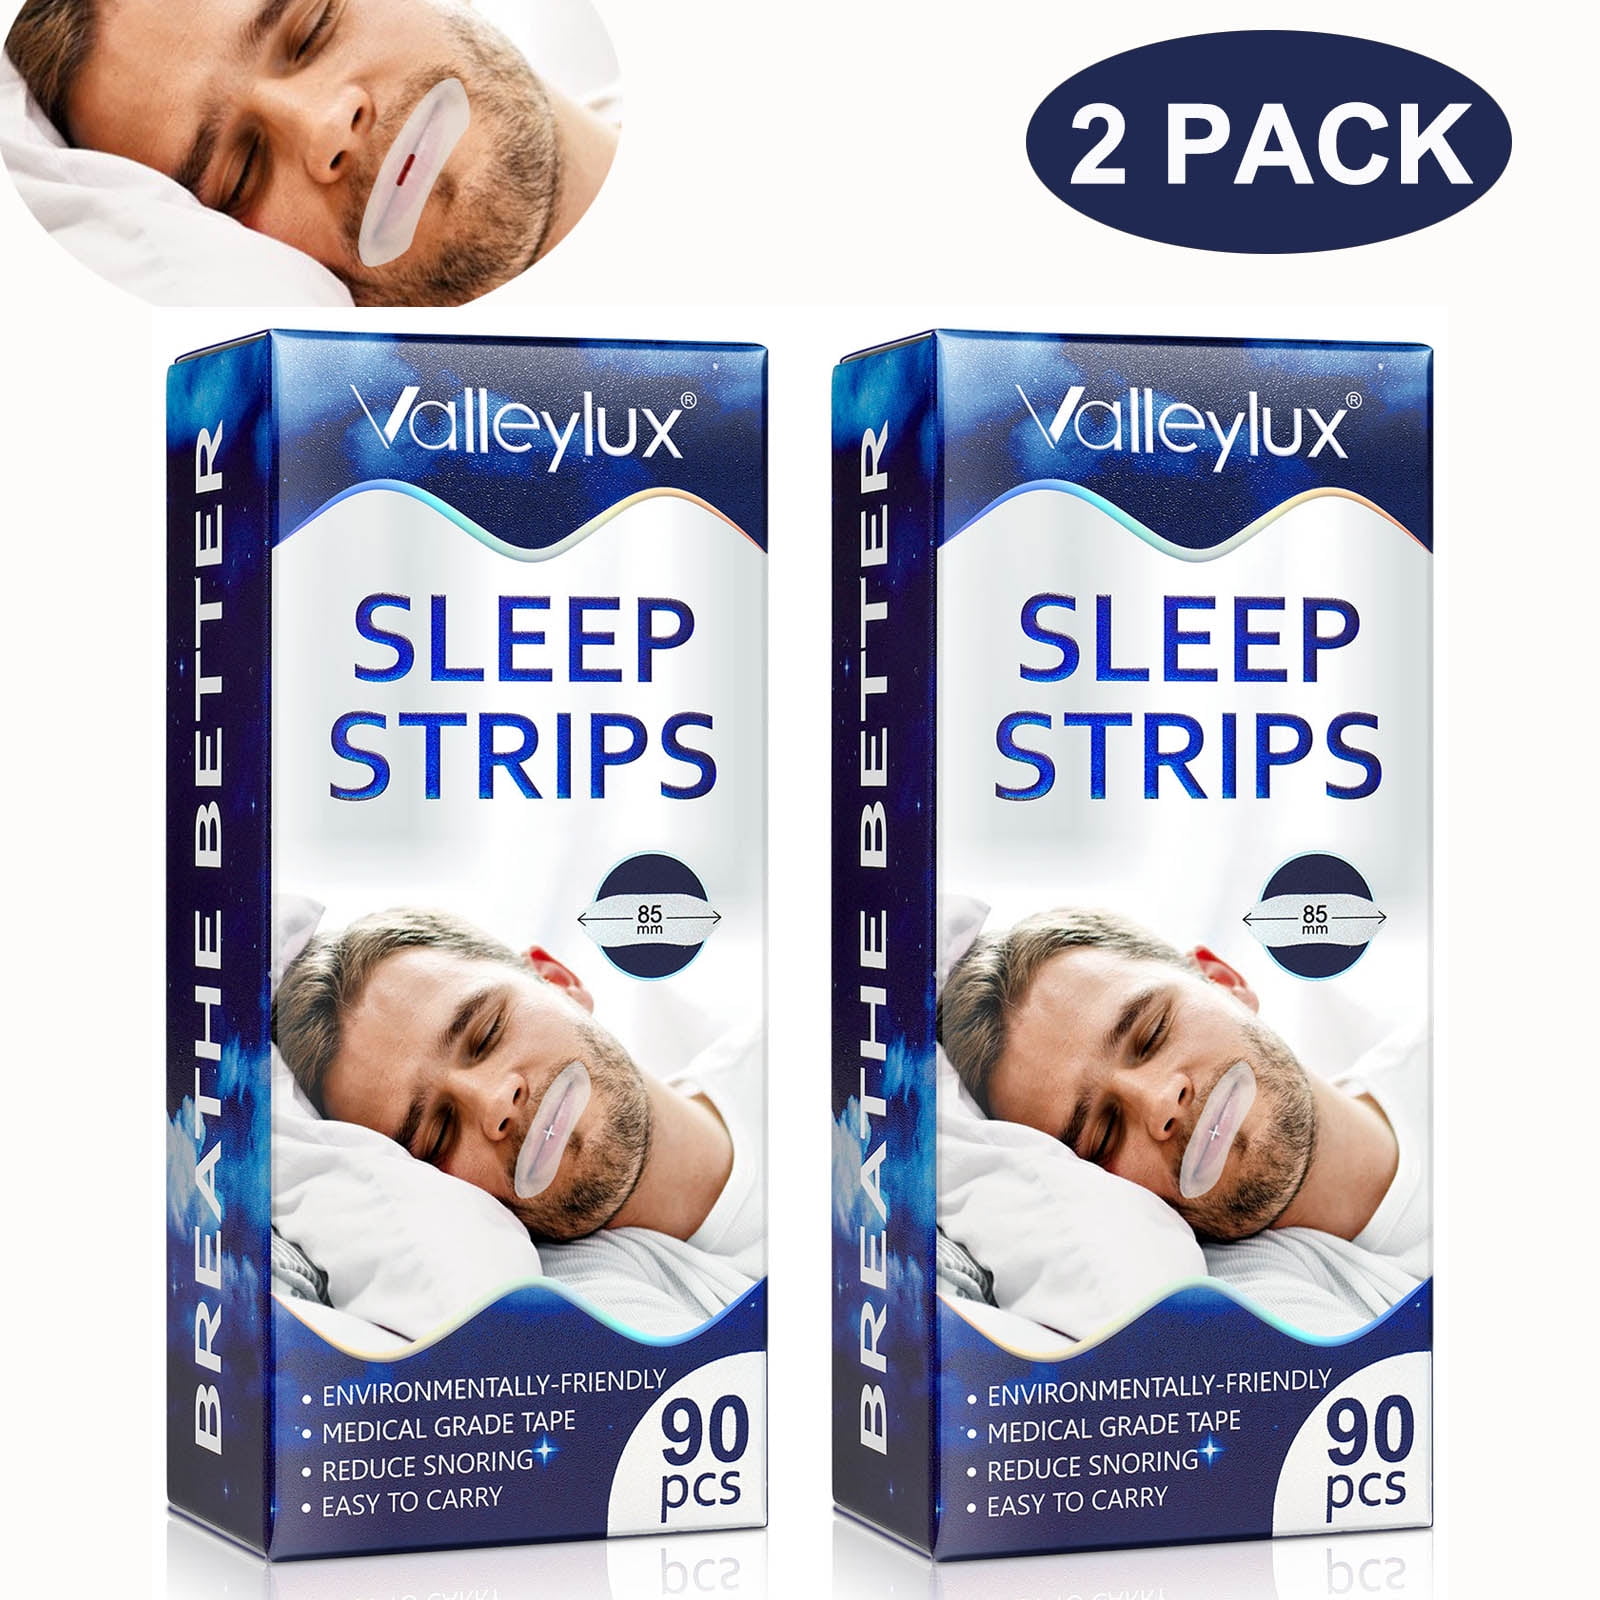 Professional Mouth Tape Nose Breathing Gently Sleep Strips for